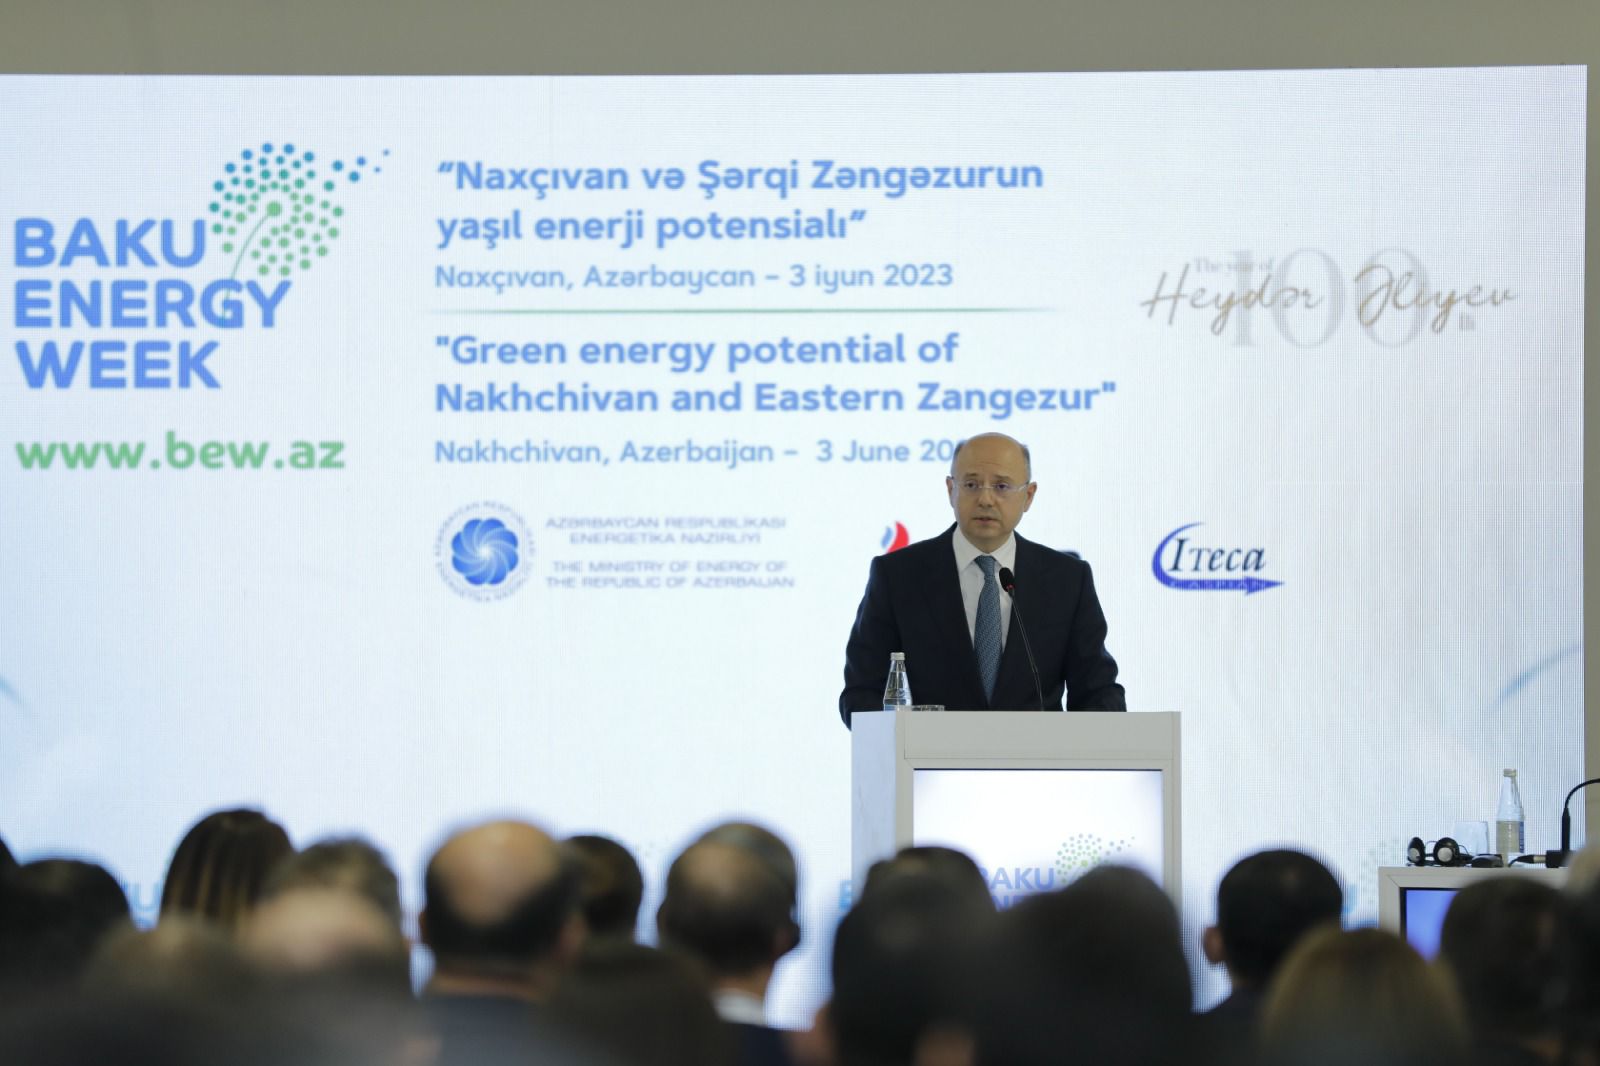 Ministry of Energy signed Memoranda of Understanding with foreign companies on green energy projects with capacity of 900MW in Nakhchivan